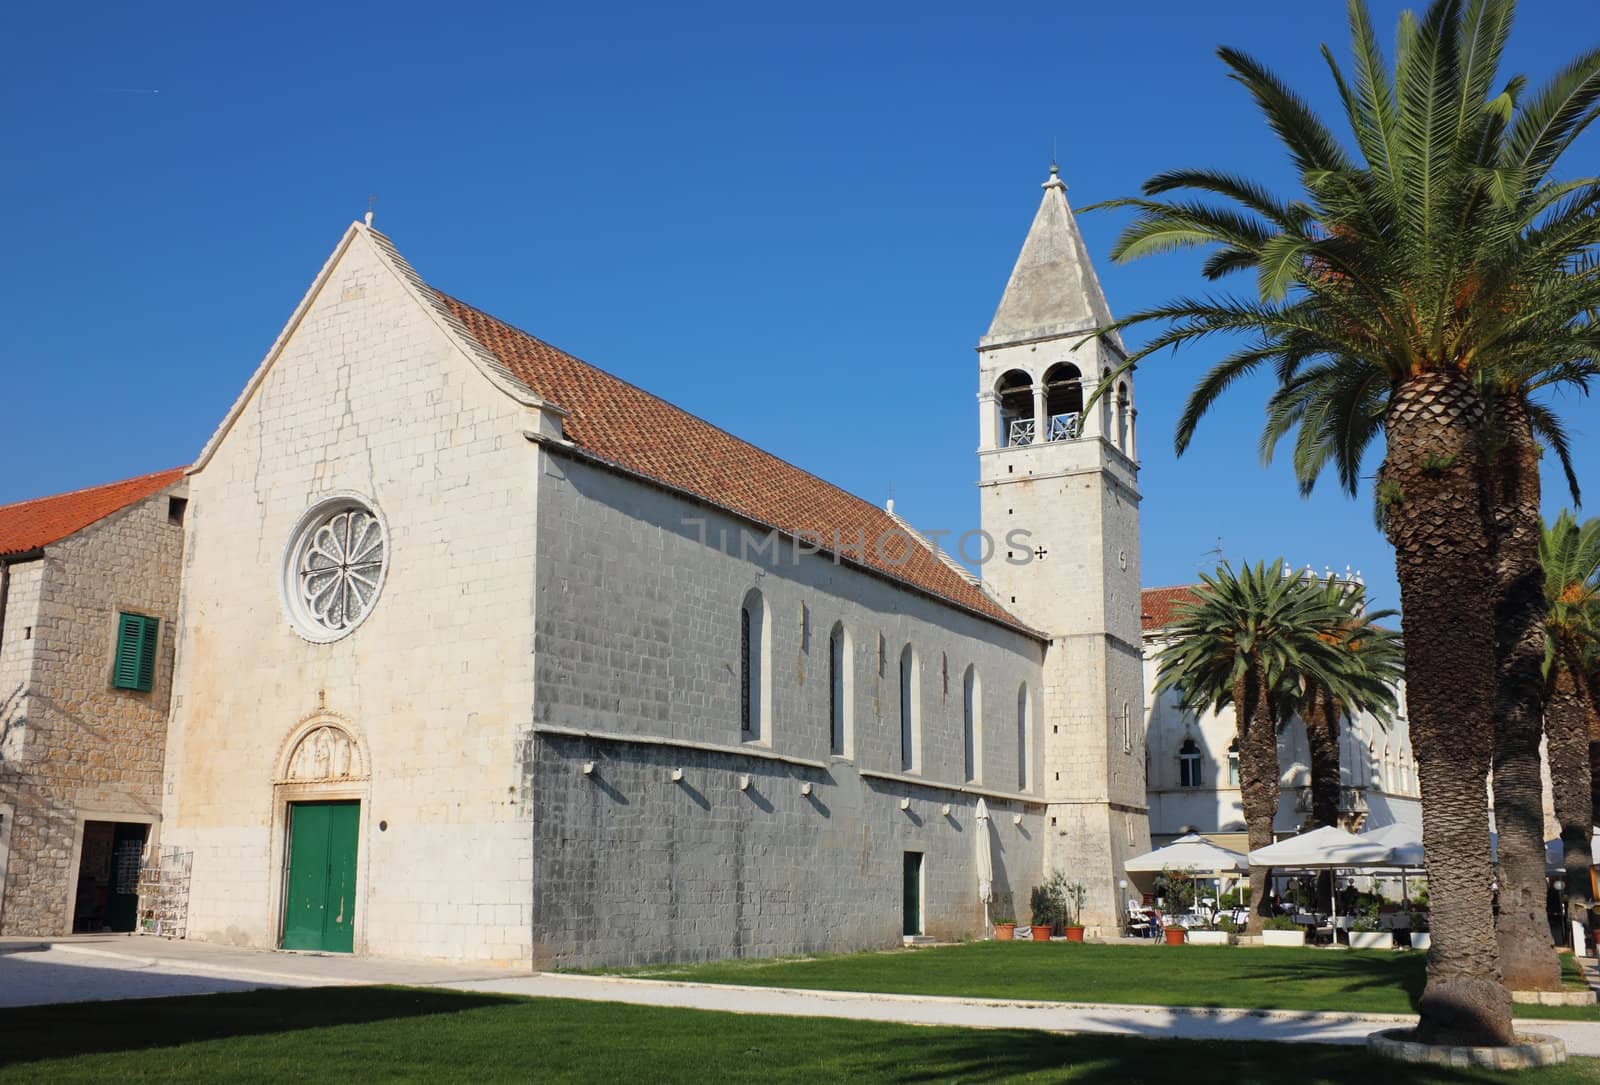 St. Dominic church and monastery in the old part of town Trogir, Croatia. 